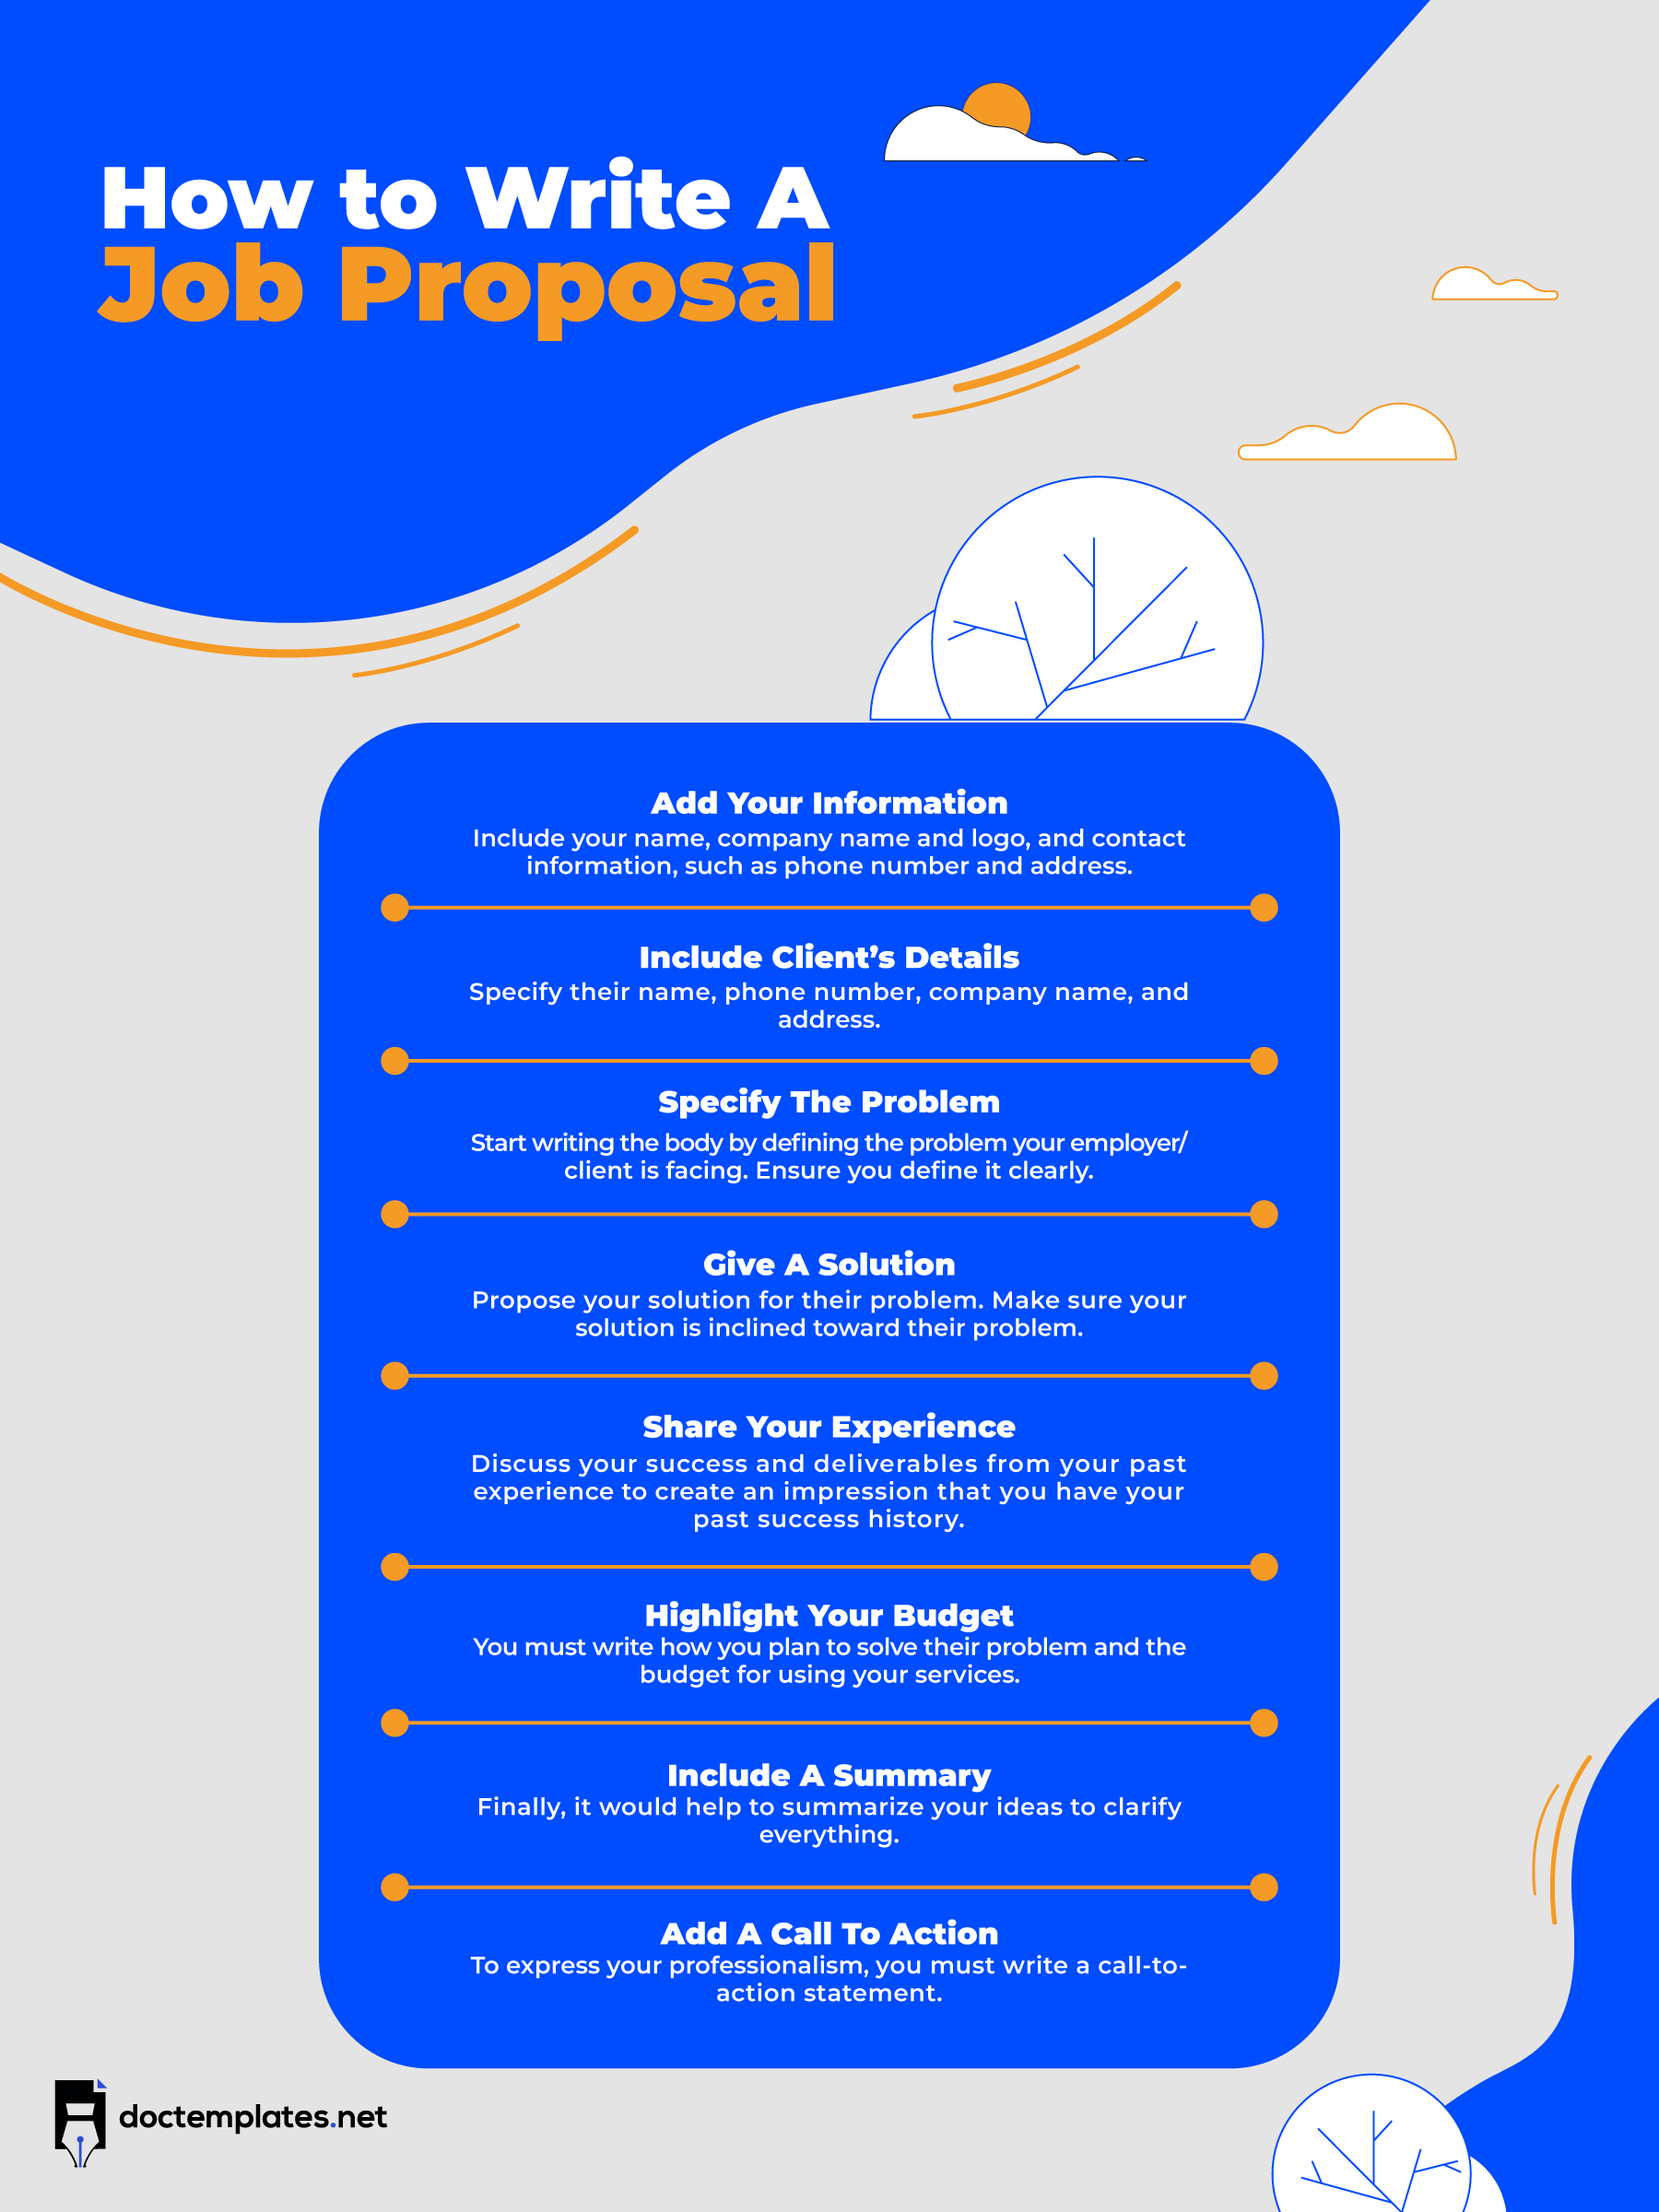 This infographic is about writing job proposal.